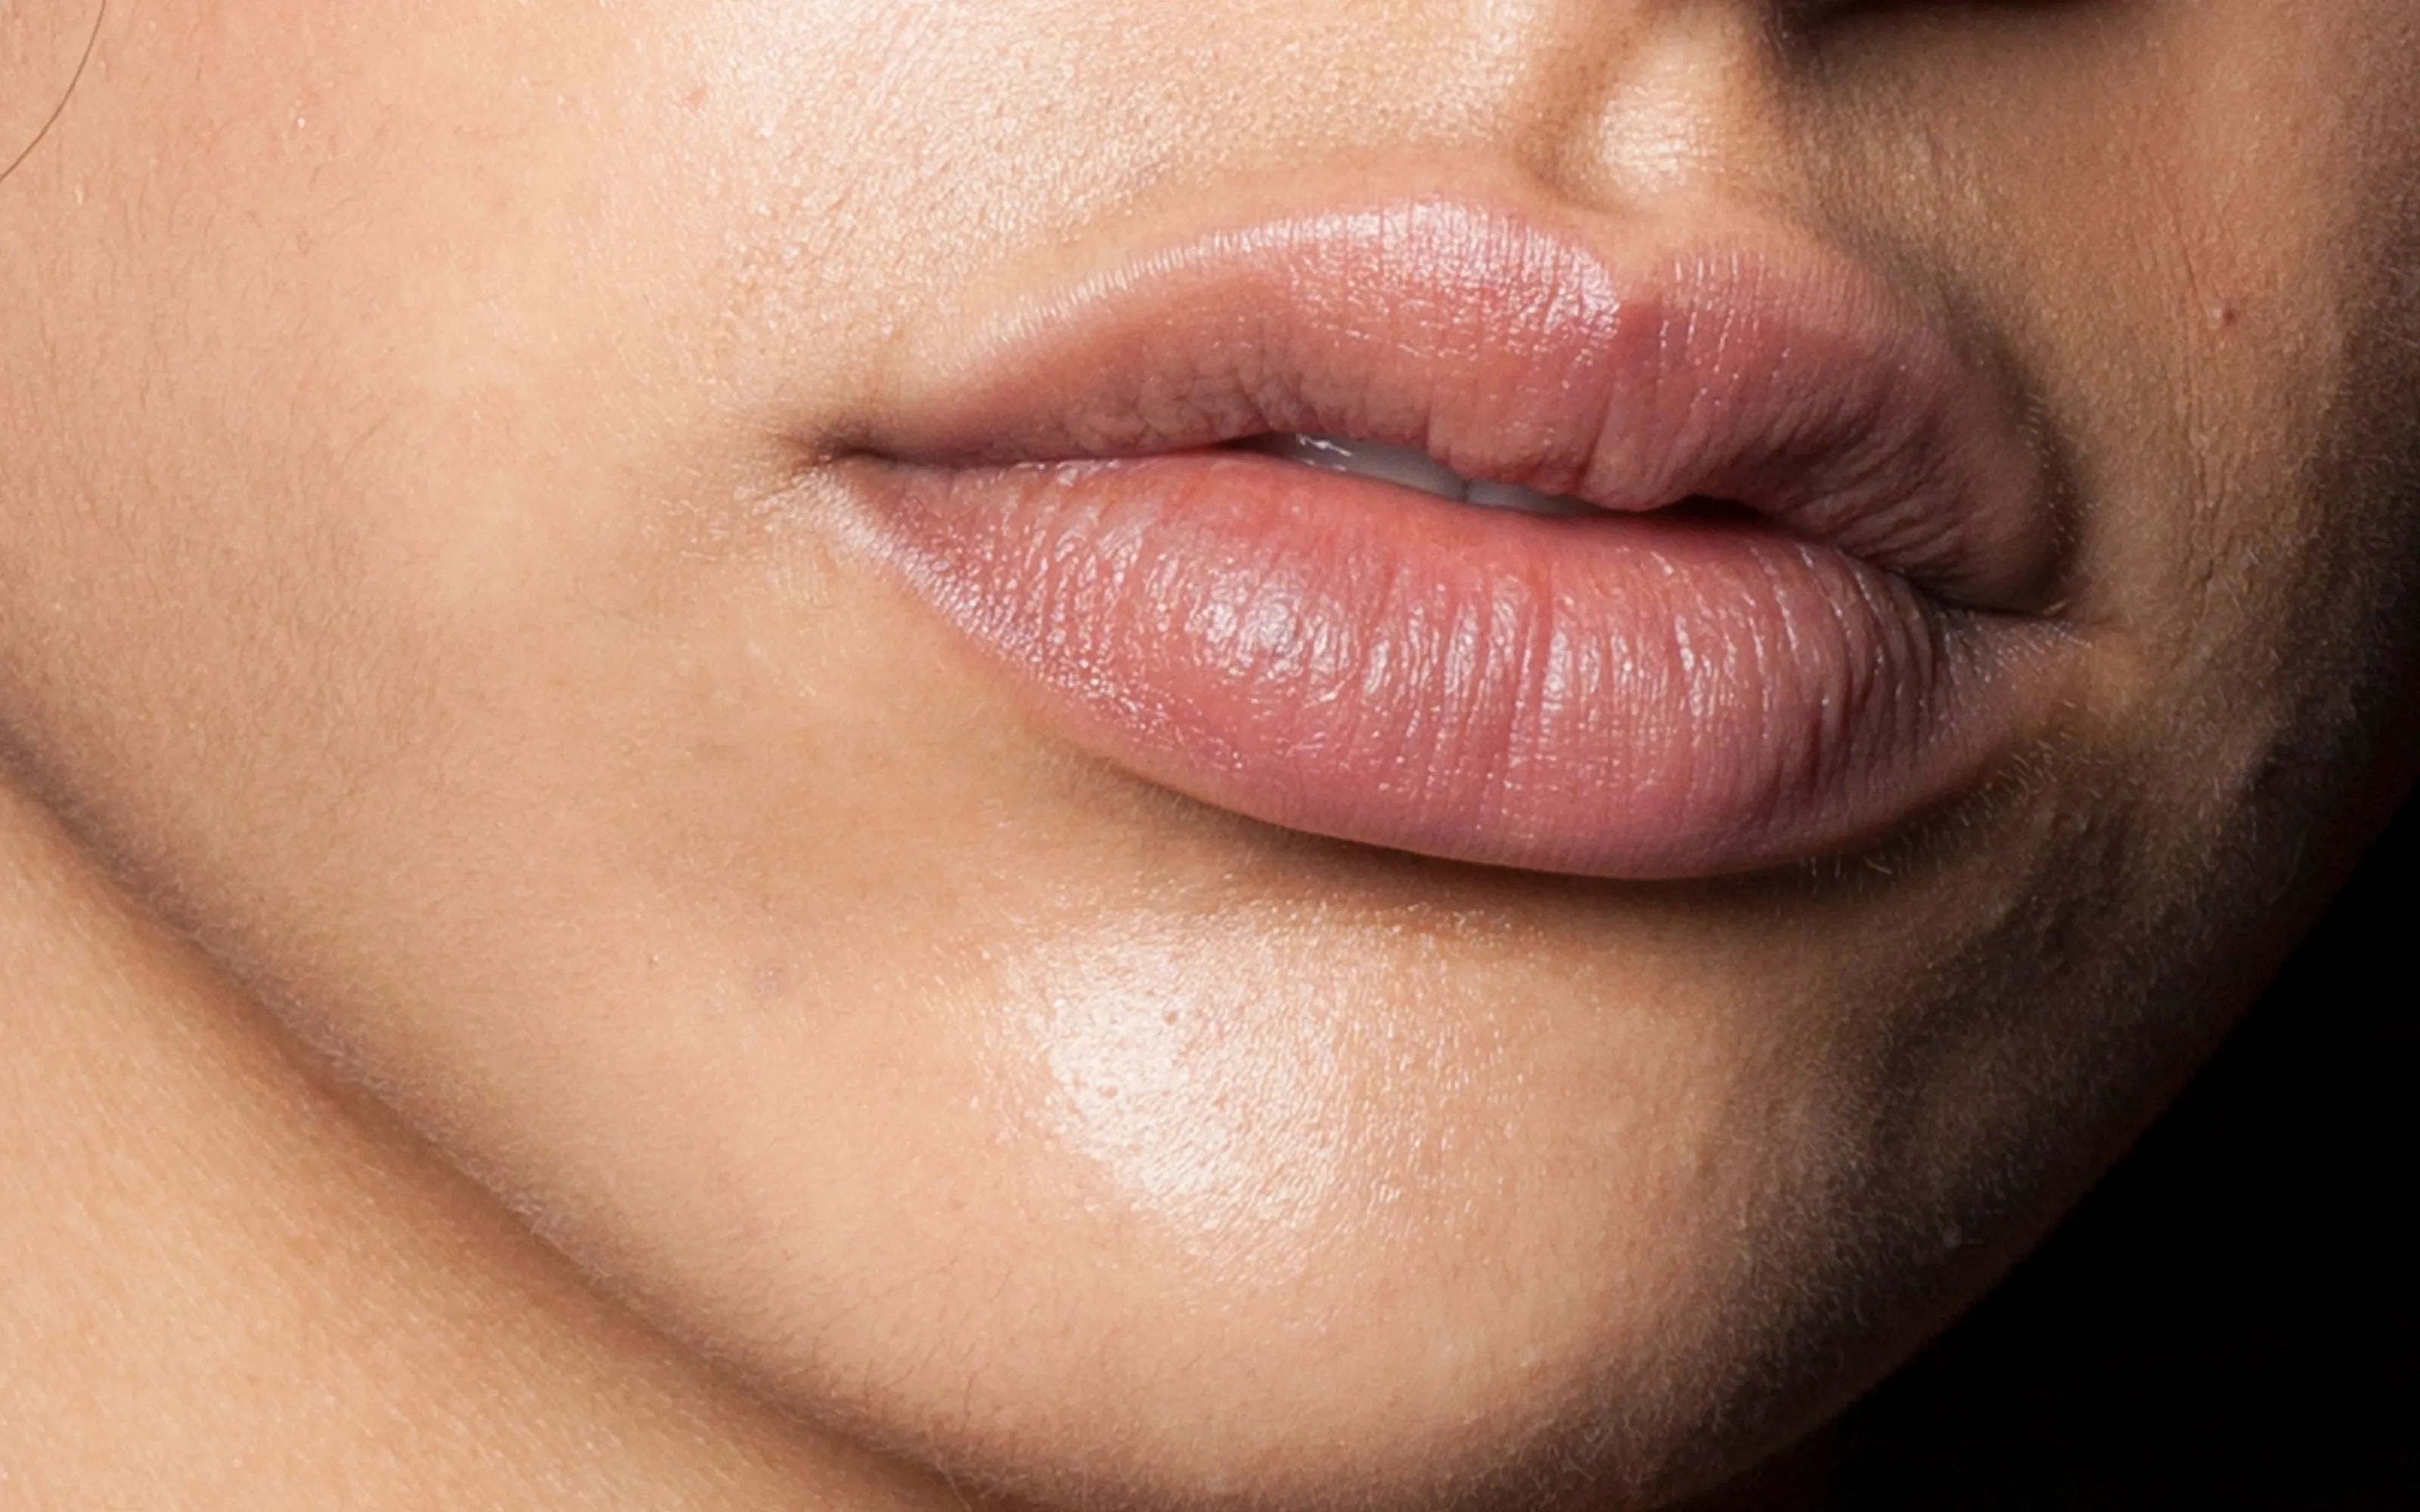 Lip Care 101: How To Care For Dry, Chapped Lips